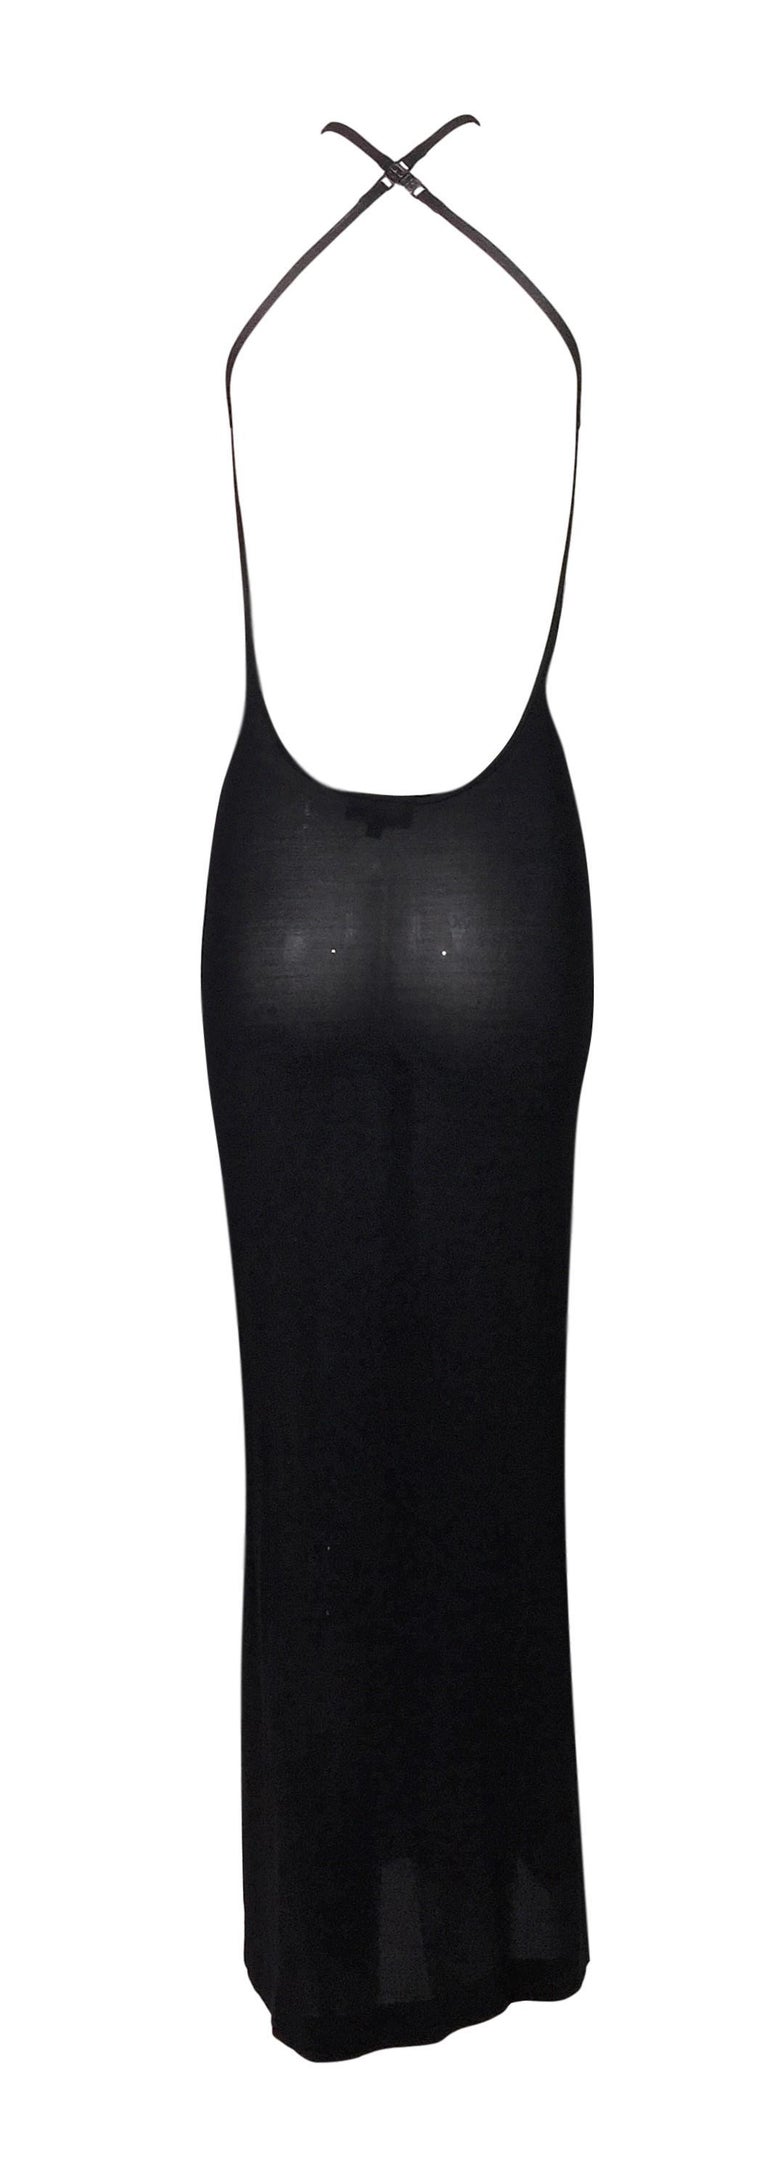 1998 Gucci by Tom Ford Sheer Black Slinky Plunging Cross Strap Gown ...